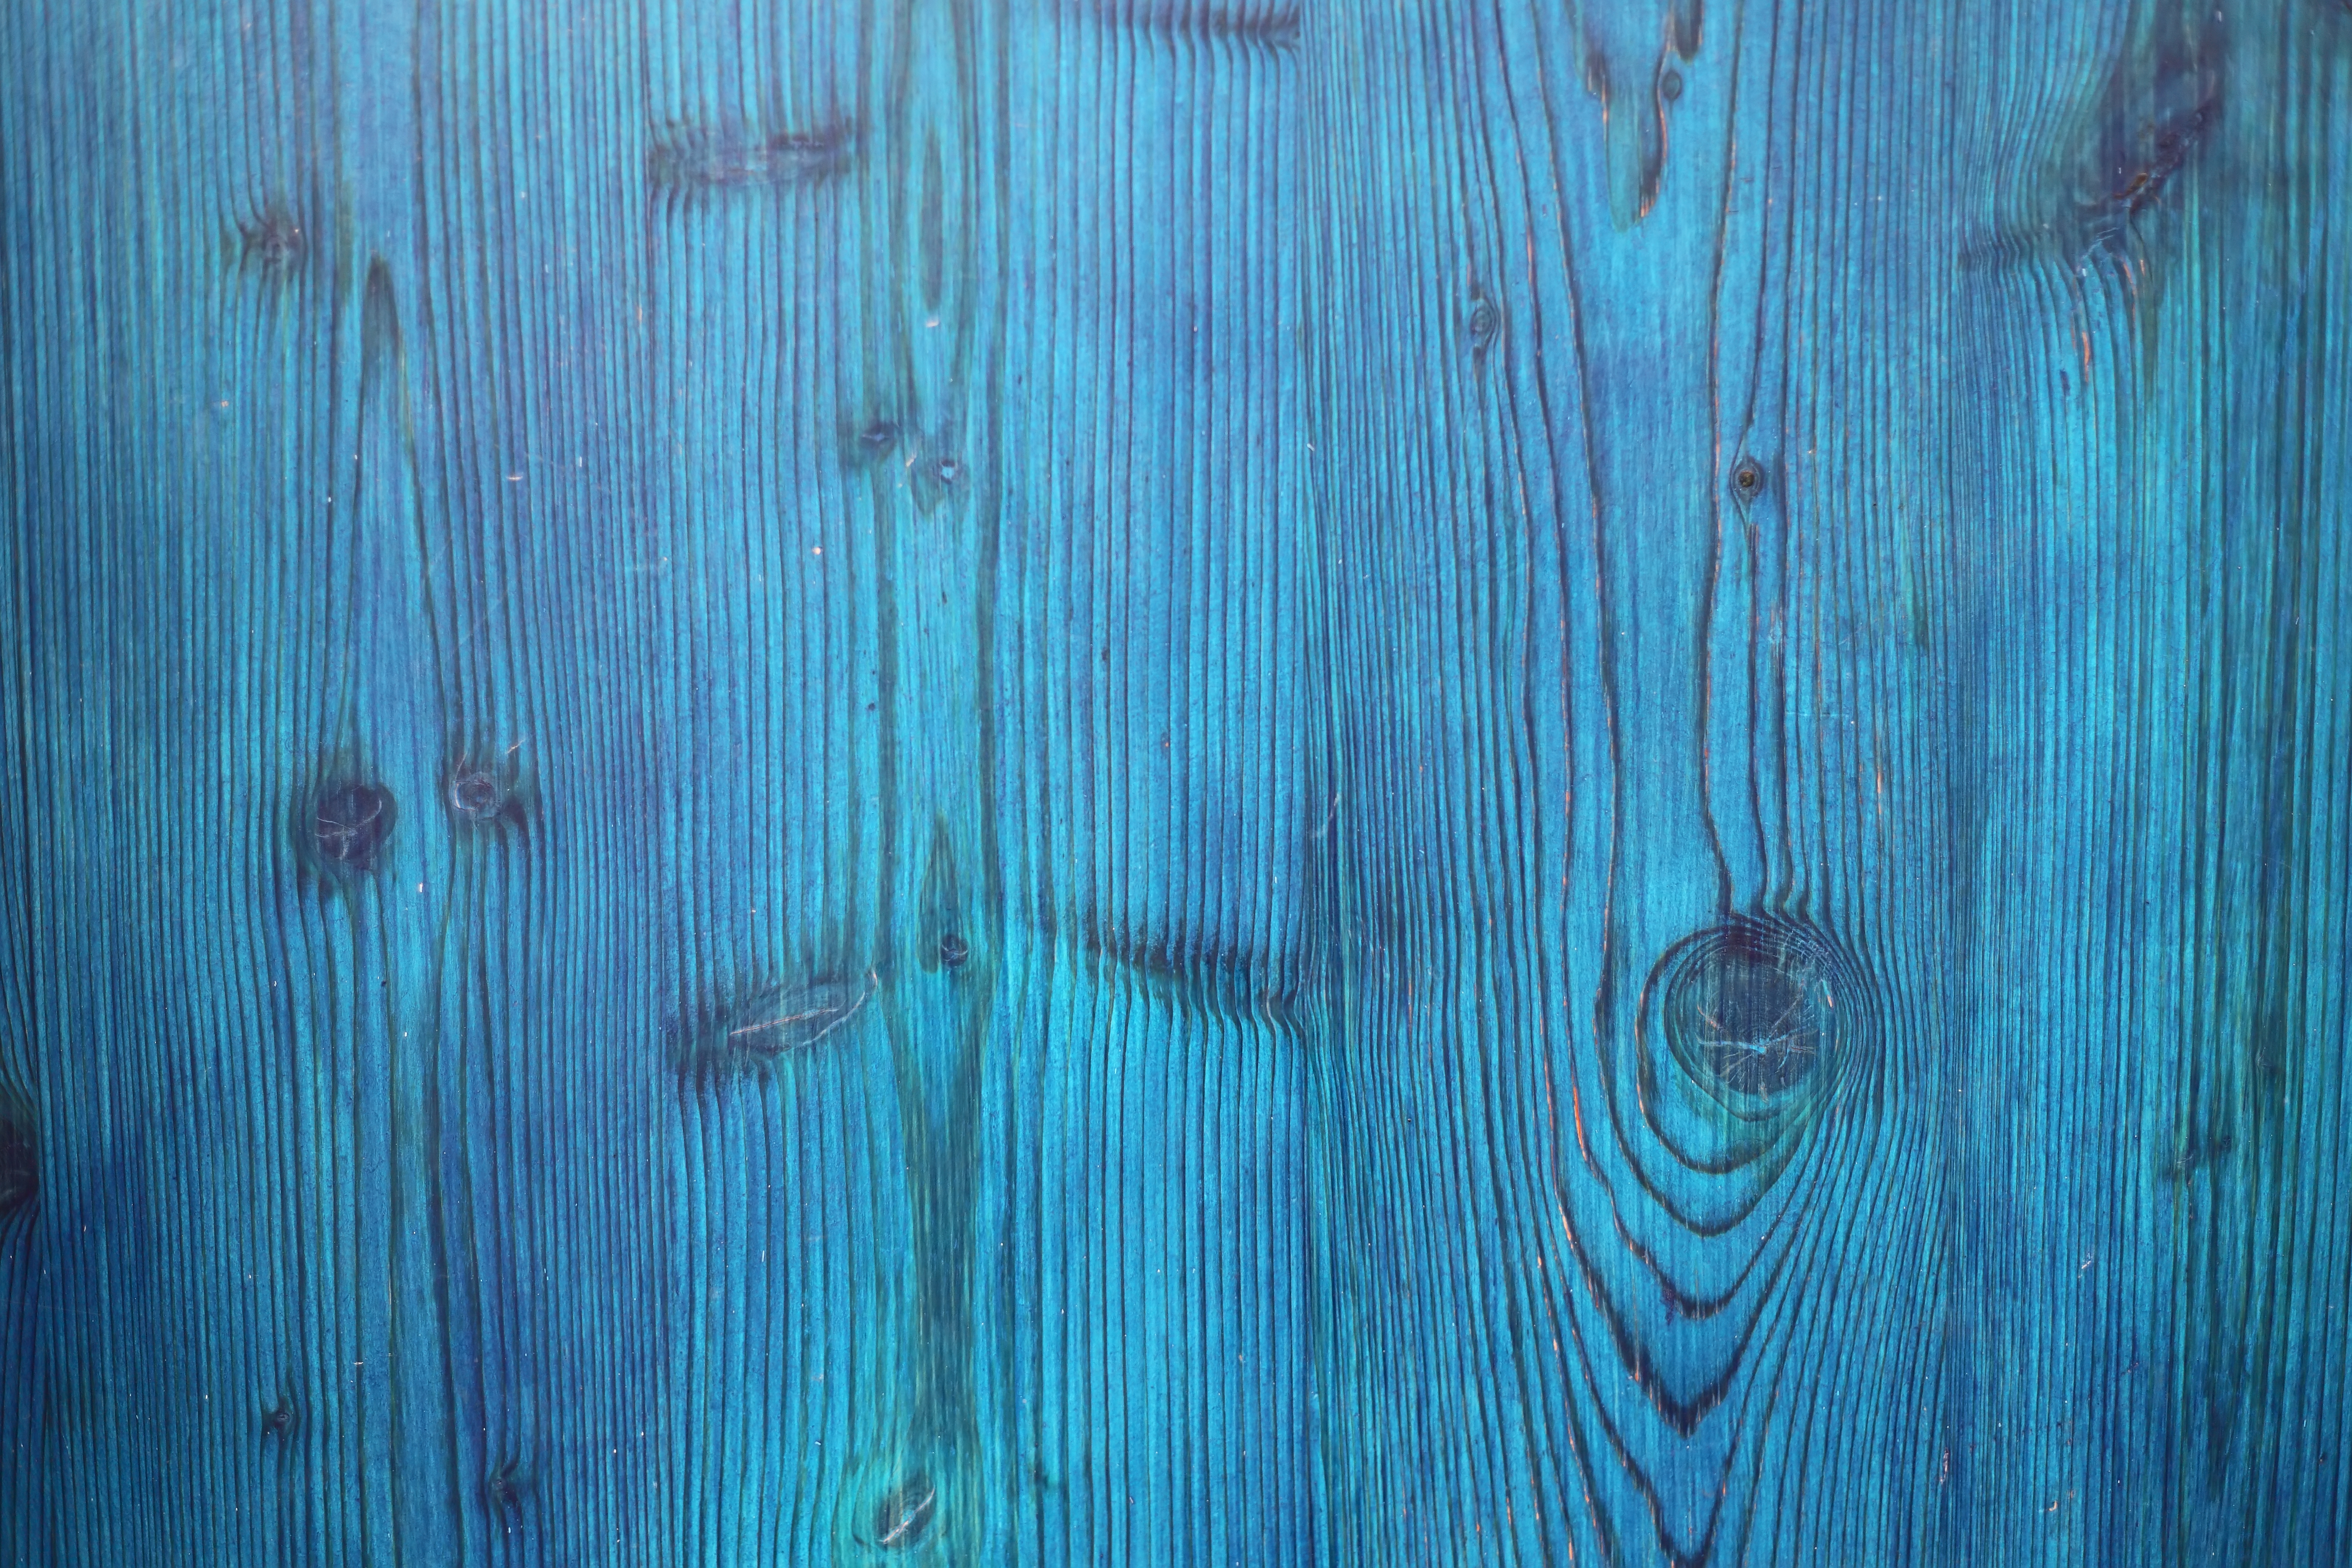 textures, planks, board, blue, wood, wooden, tree, texture, surface iphone wallpaper